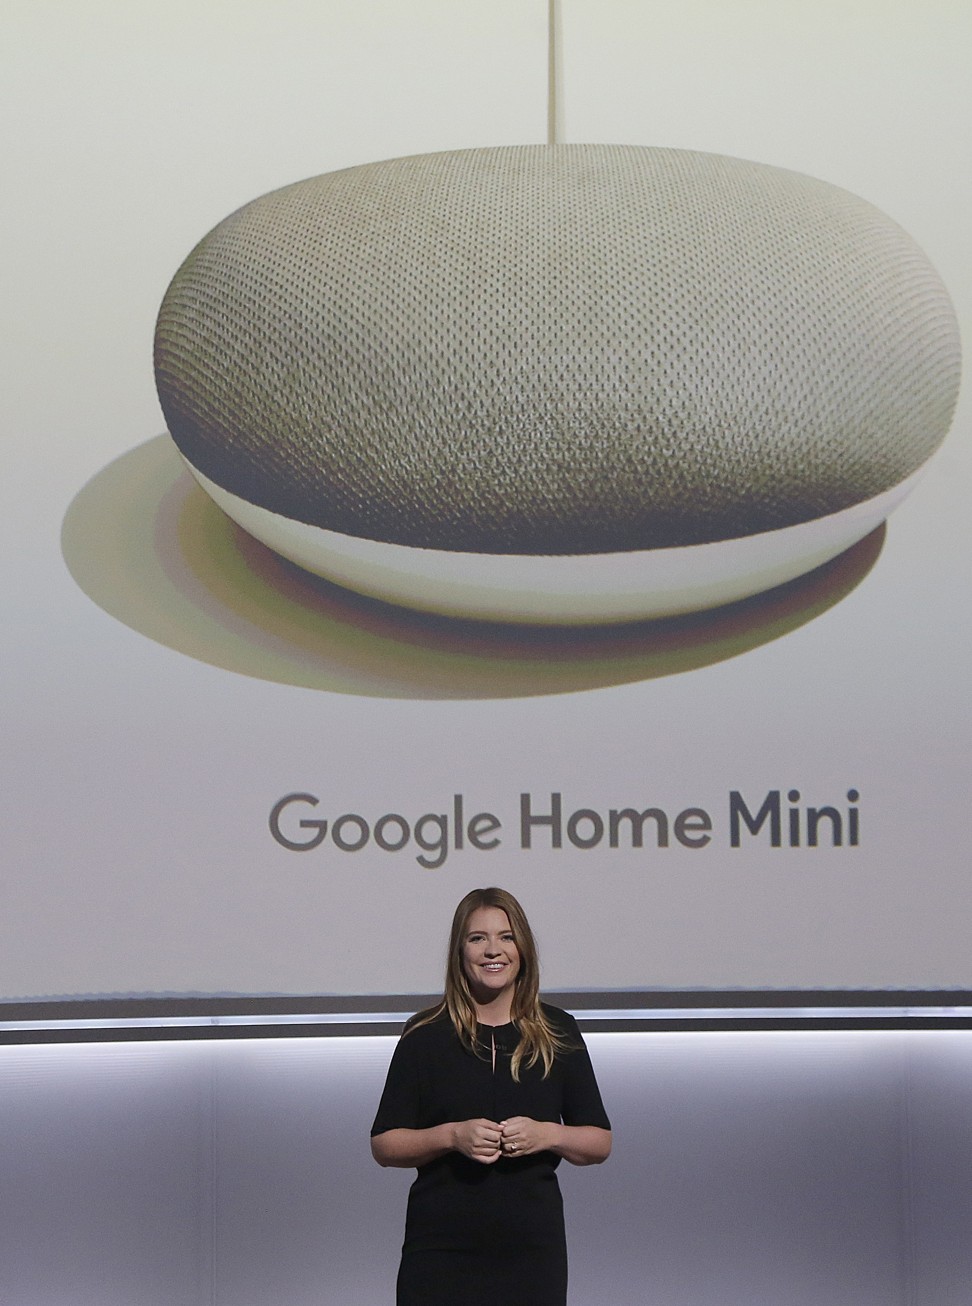 Google's Isabelle Olsson speaks about Google Home Mini devices at a Google event in San Francisco. Photo: AP